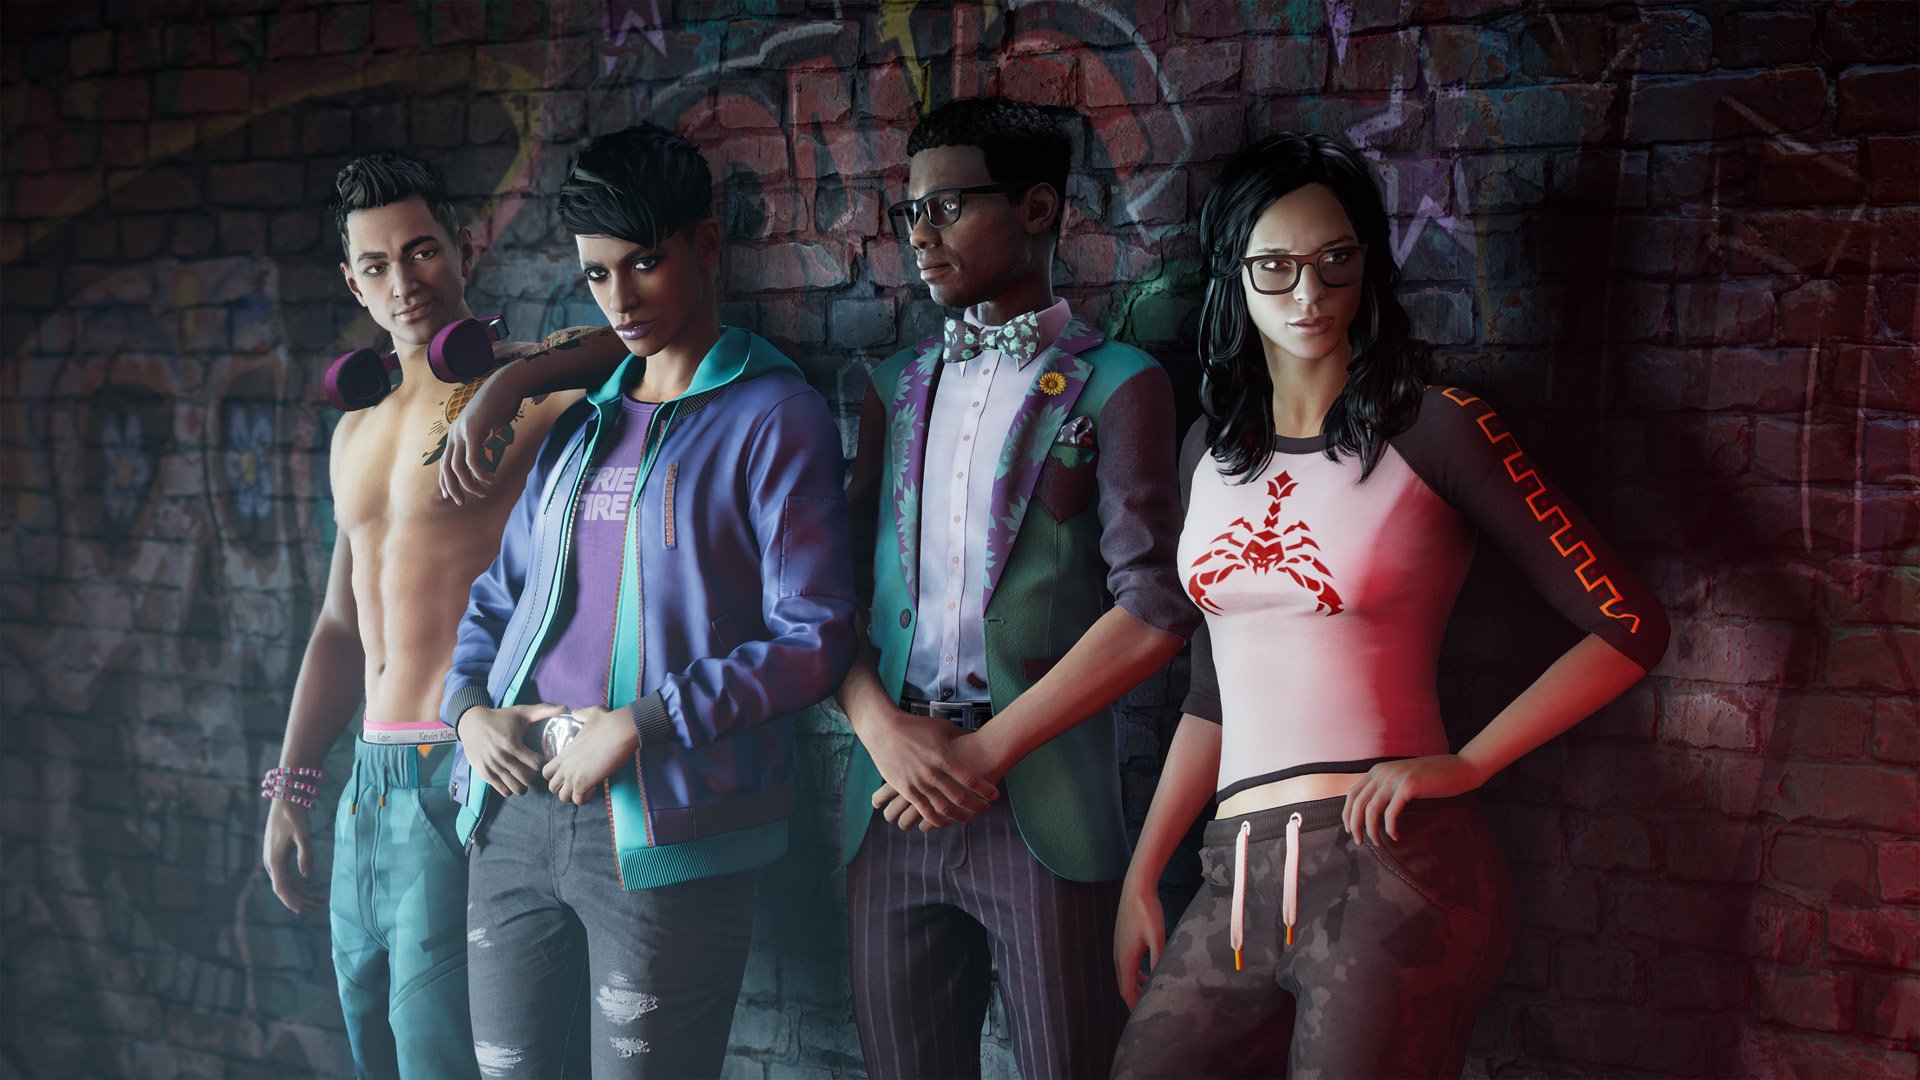 New Saints Row video offers a look at actual gameplay, following fan